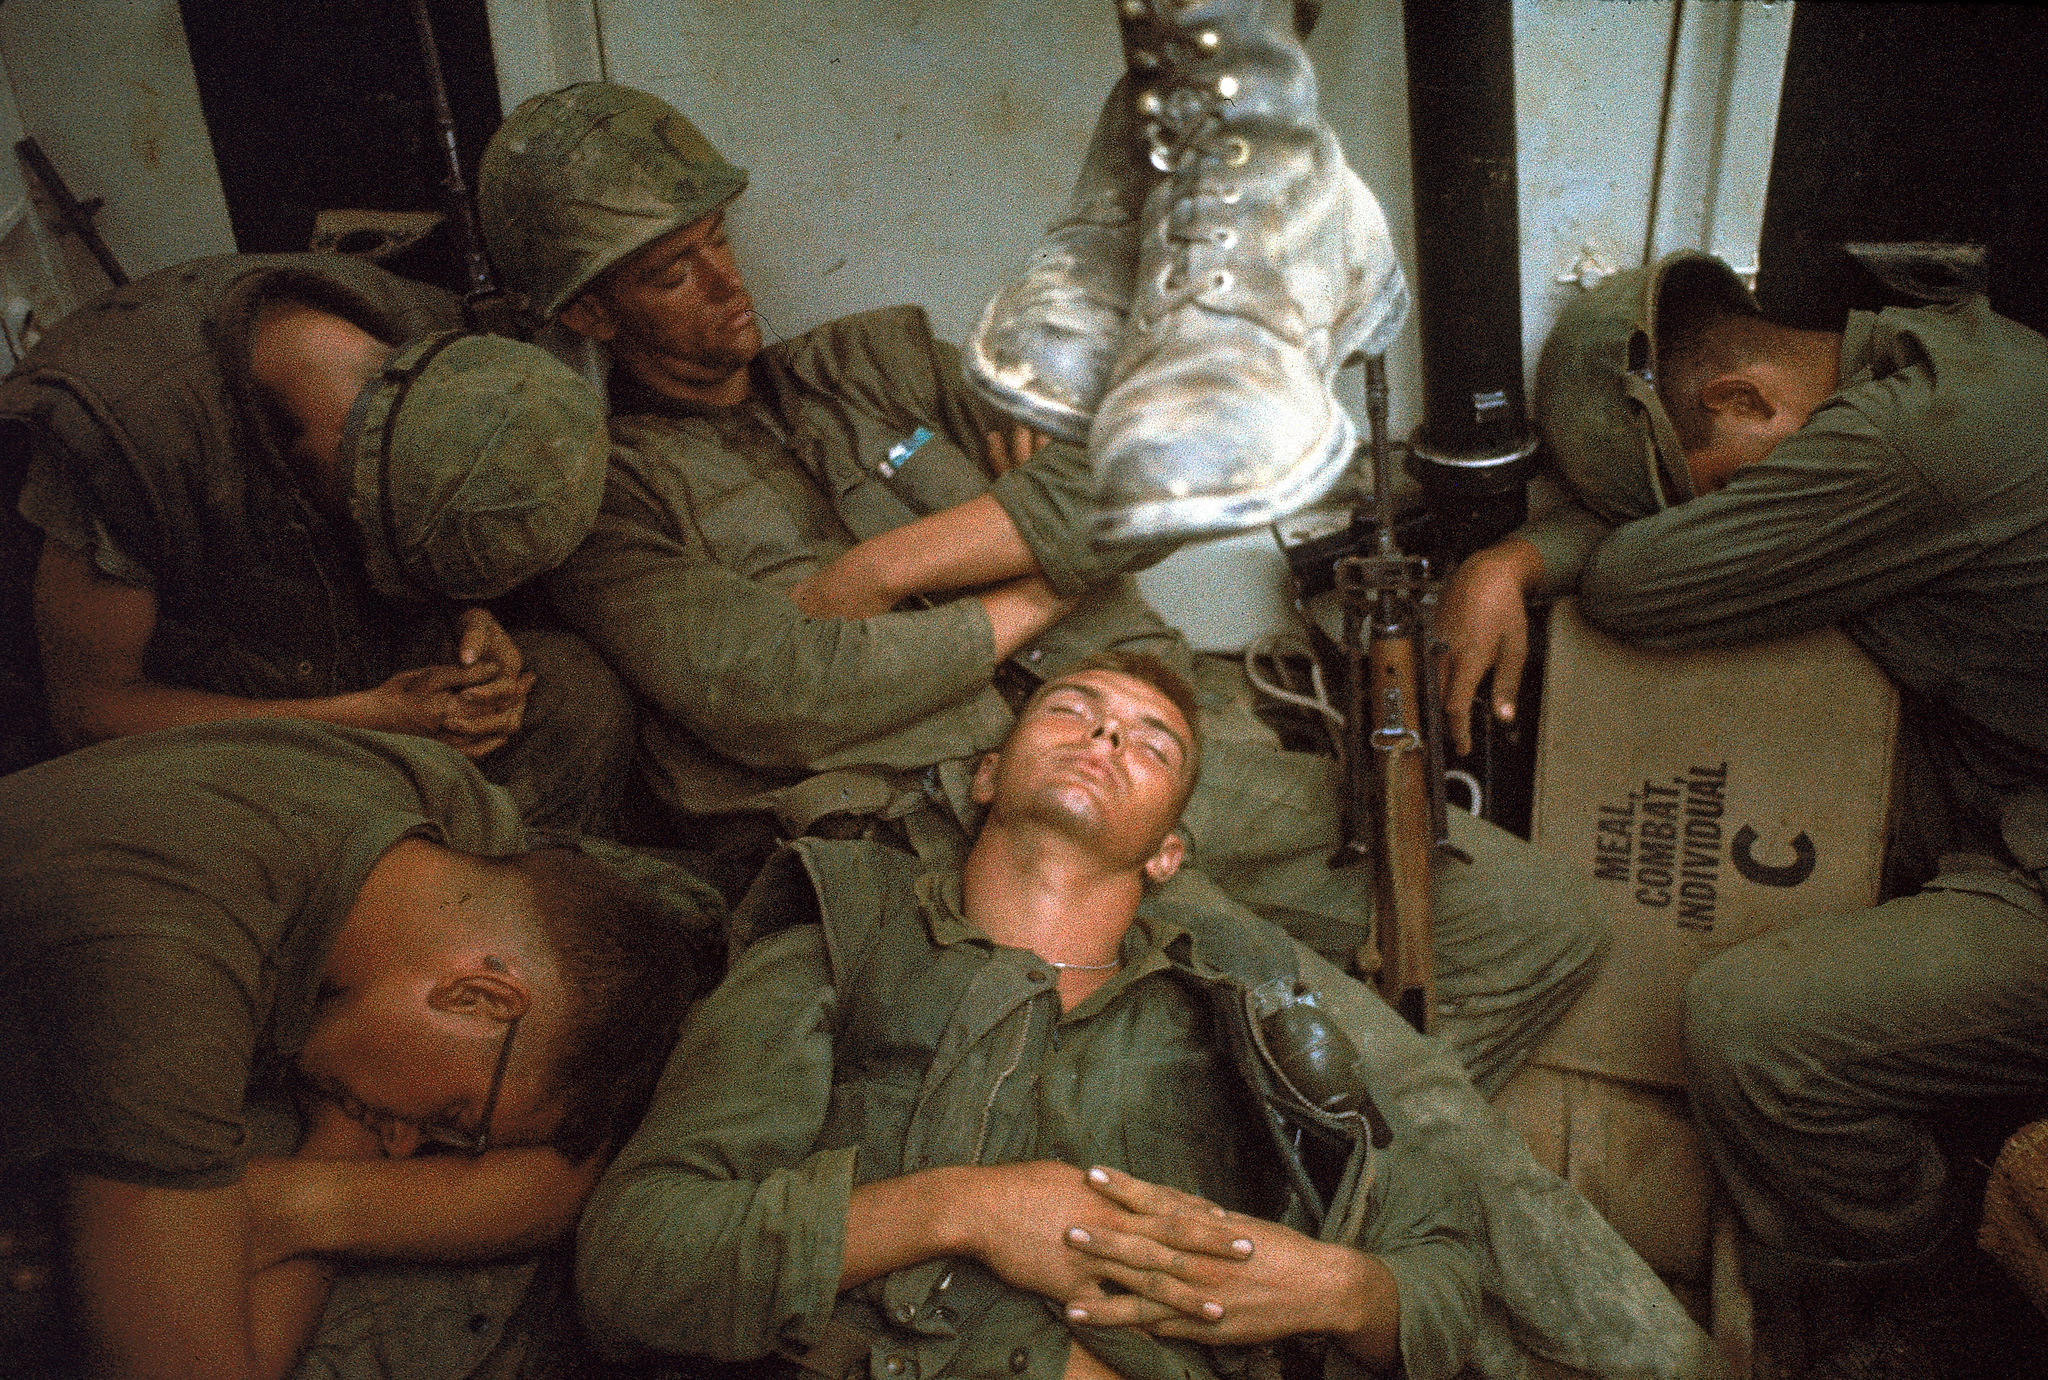 Weary American Marines of 7th Regiment catch some sleep following intense fighting in the area around Cape Batangan during the Vietnam War, November 1965. Marines fought from dawn until dark in temperatures that reached 130 degrees before they secured the beachhead.